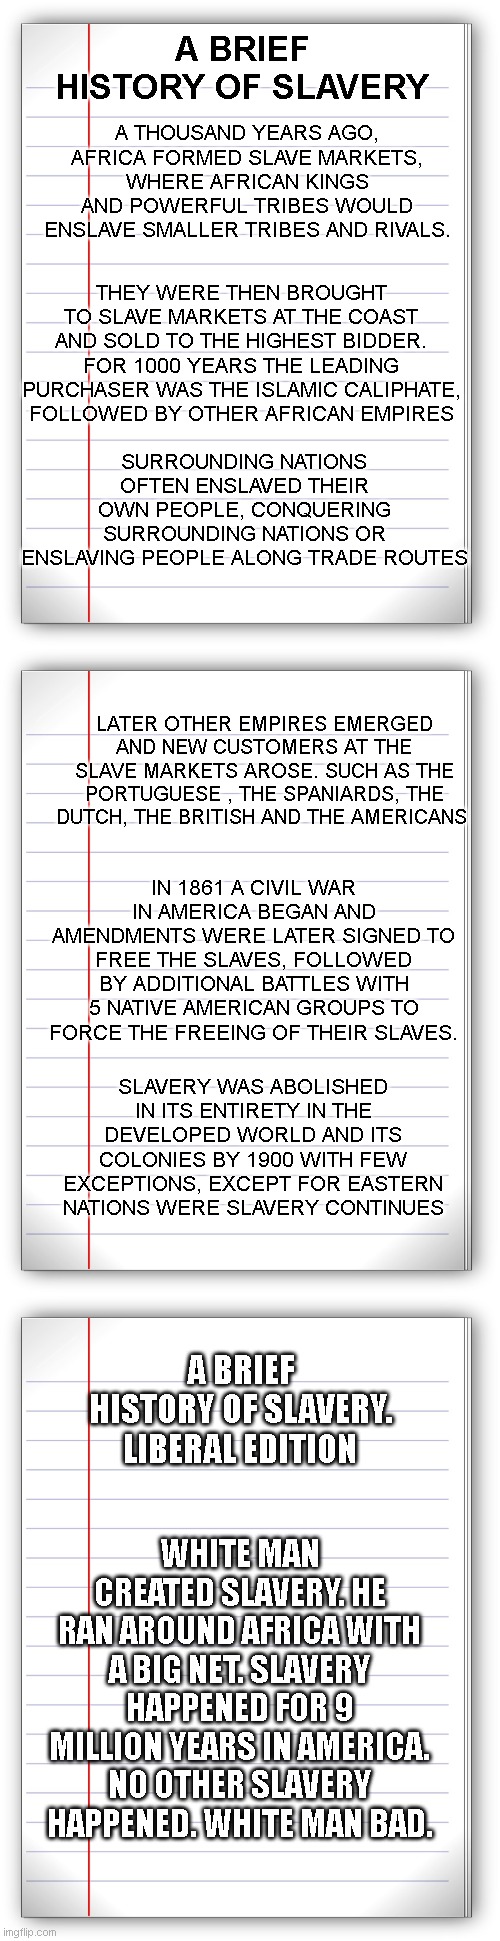 A BRIEF HISTORY OF SLAVERY; A THOUSAND YEARS AGO, AFRICA FORMED SLAVE MARKETS, WHERE AFRICAN KINGS AND POWERFUL TRIBES WOULD ENSLAVE SMALLER TRIBES AND RIVALS. THEY WERE THEN BROUGHT TO SLAVE MARKETS AT THE COAST AND SOLD TO THE HIGHEST BIDDER. FOR 1000 YEARS THE LEADING PURCHASER WAS THE ISLAMIC CALIPHATE, FOLLOWED BY OTHER AFRICAN EMPIRES; SURROUNDING NATIONS OFTEN ENSLAVED THEIR OWN PEOPLE, CONQUERING SURROUNDING NATIONS OR ENSLAVING PEOPLE ALONG TRADE ROUTES; LATER OTHER EMPIRES EMERGED AND NEW CUSTOMERS AT THE SLAVE MARKETS AROSE. SUCH AS THE PORTUGUESE , THE SPANIARDS, THE DUTCH, THE BRITISH AND THE AMERICANS; IN 1861 A CIVIL WAR IN AMERICA BEGAN AND AMENDMENTS WERE LATER SIGNED TO FREE THE SLAVES, FOLLOWED BY ADDITIONAL BATTLES WITH 5 NATIVE AMERICAN GROUPS TO FORCE THE FREEING OF THEIR SLAVES. SLAVERY WAS ABOLISHED IN ITS ENTIRETY IN THE DEVELOPED WORLD AND ITS COLONIES BY 1900 WITH FEW EXCEPTIONS, EXCEPT FOR EASTERN NATIONS WERE SLAVERY CONTINUES; A BRIEF HISTORY OF SLAVERY. LIBERAL EDITION; WHITE MAN CREATED SLAVERY. HE RAN AROUND AFRICA WITH A BIG NET. SLAVERY HAPPENED FOR 9 MILLION YEARS IN AMERICA. NO OTHER SLAVERY HAPPENED. WHITE MAN BAD. | image tagged in lined paper | made w/ Imgflip meme maker